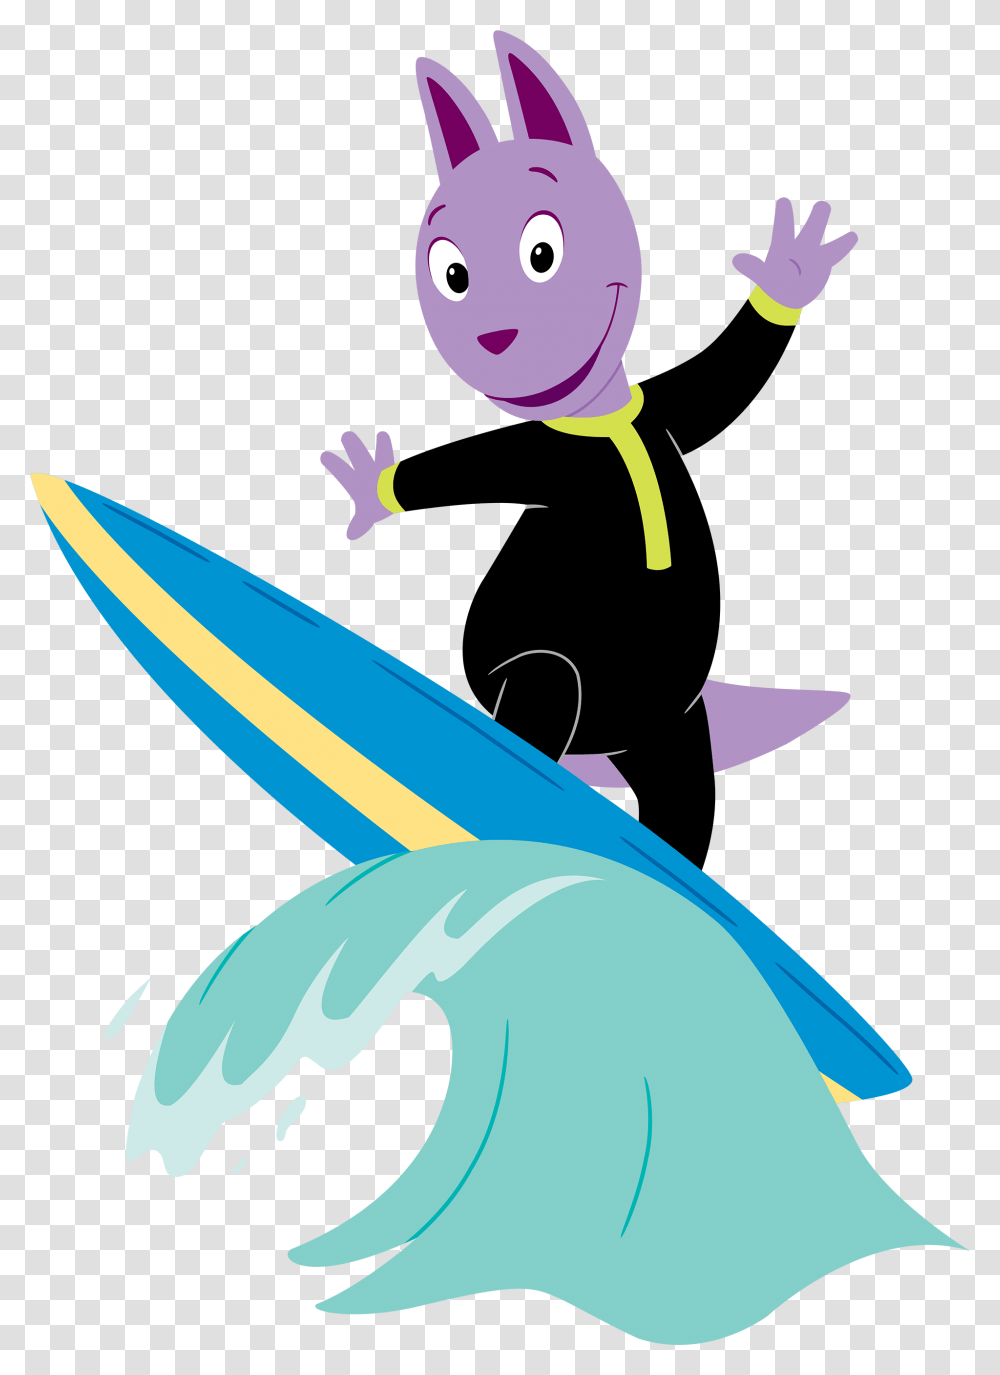 Hands Clipart Surfer Backyardigans Surf, Sea, Outdoors, Water, Nature Transparent Png